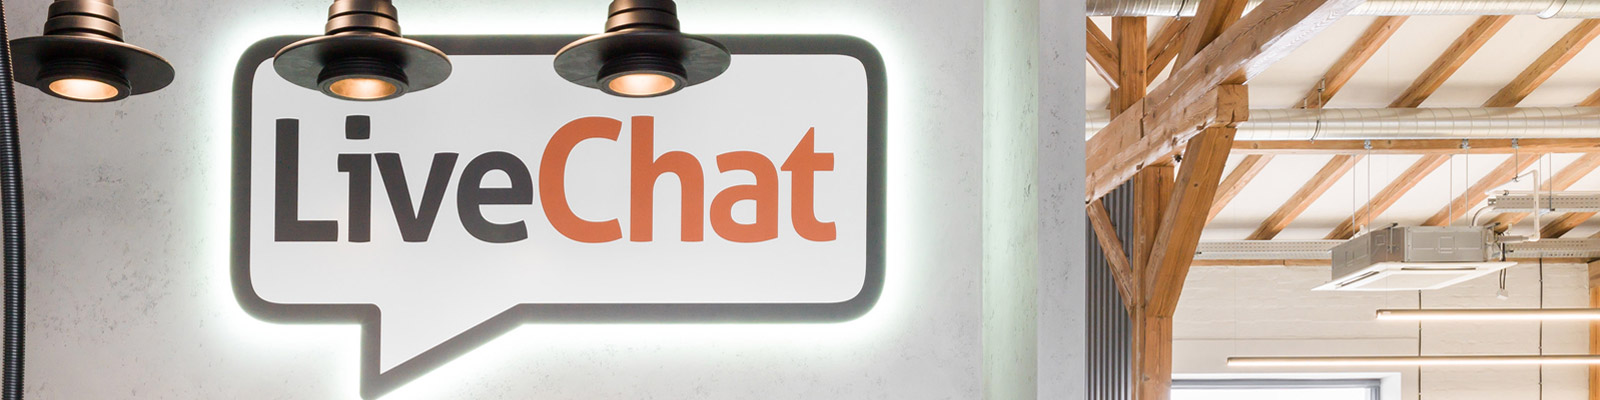 LiveChat Software S.A., Wroclaw